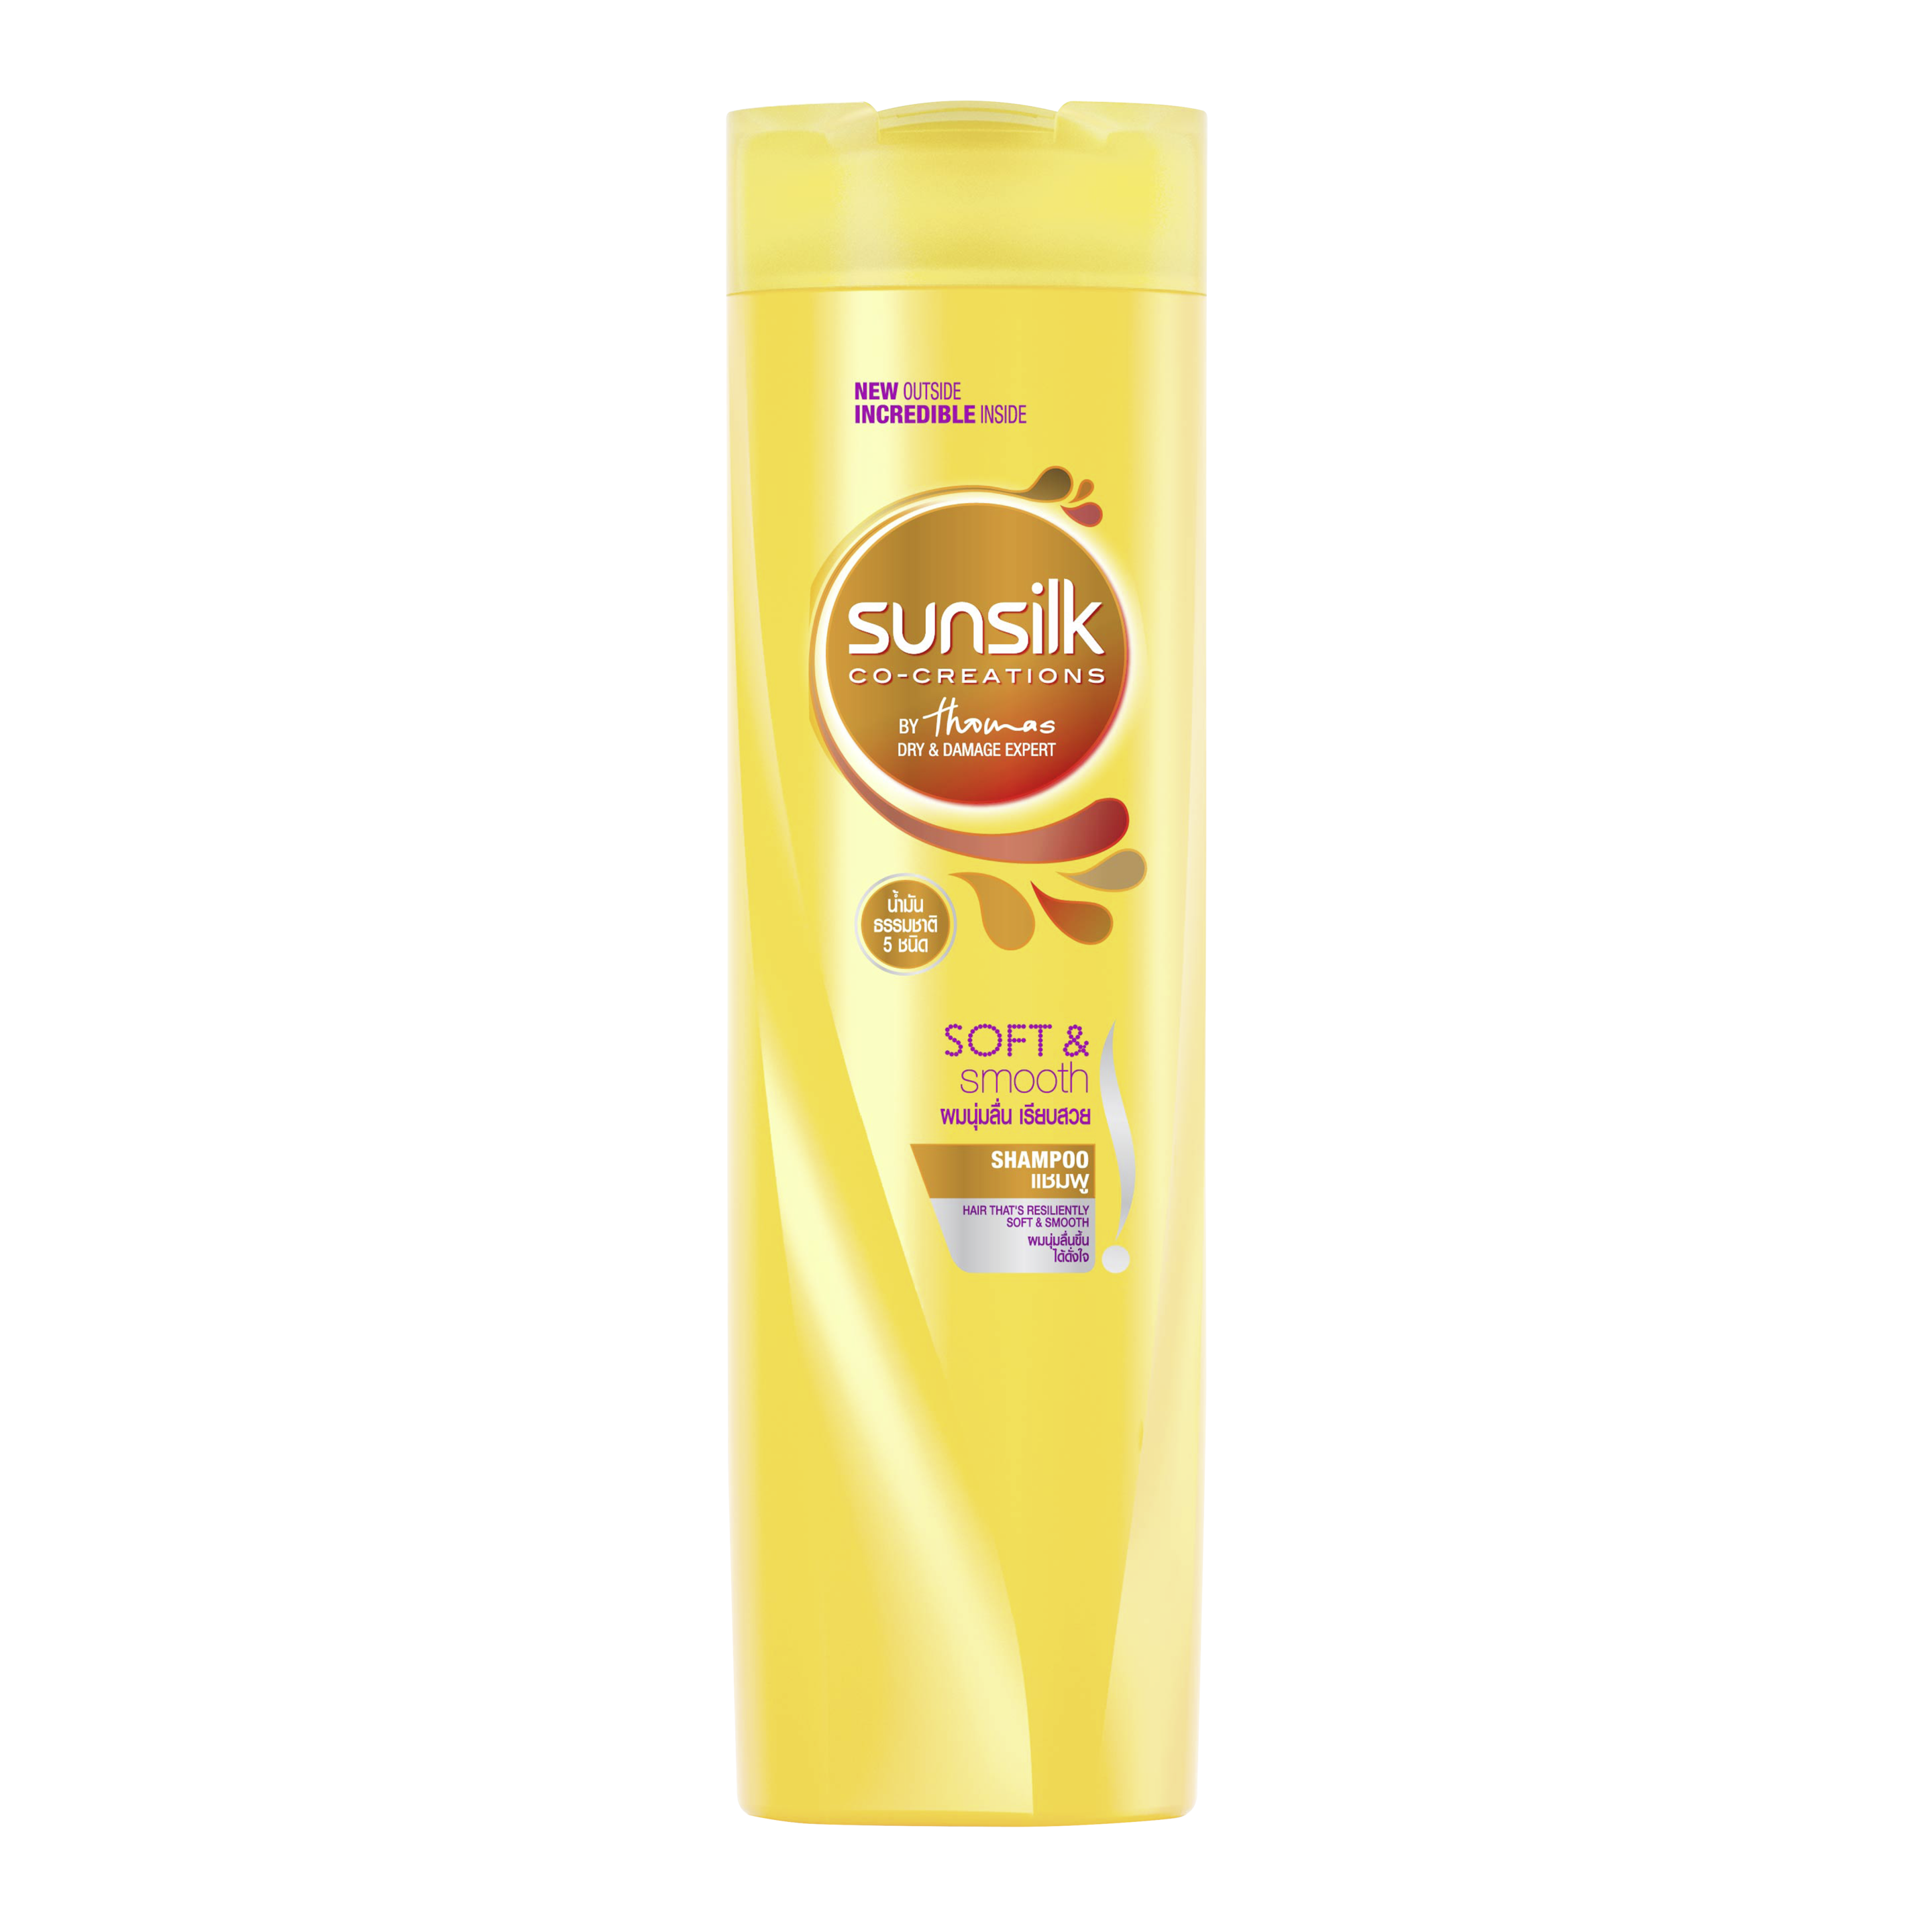 Sunsilk Soft and Smooth Shampoo 320ml front of pack image